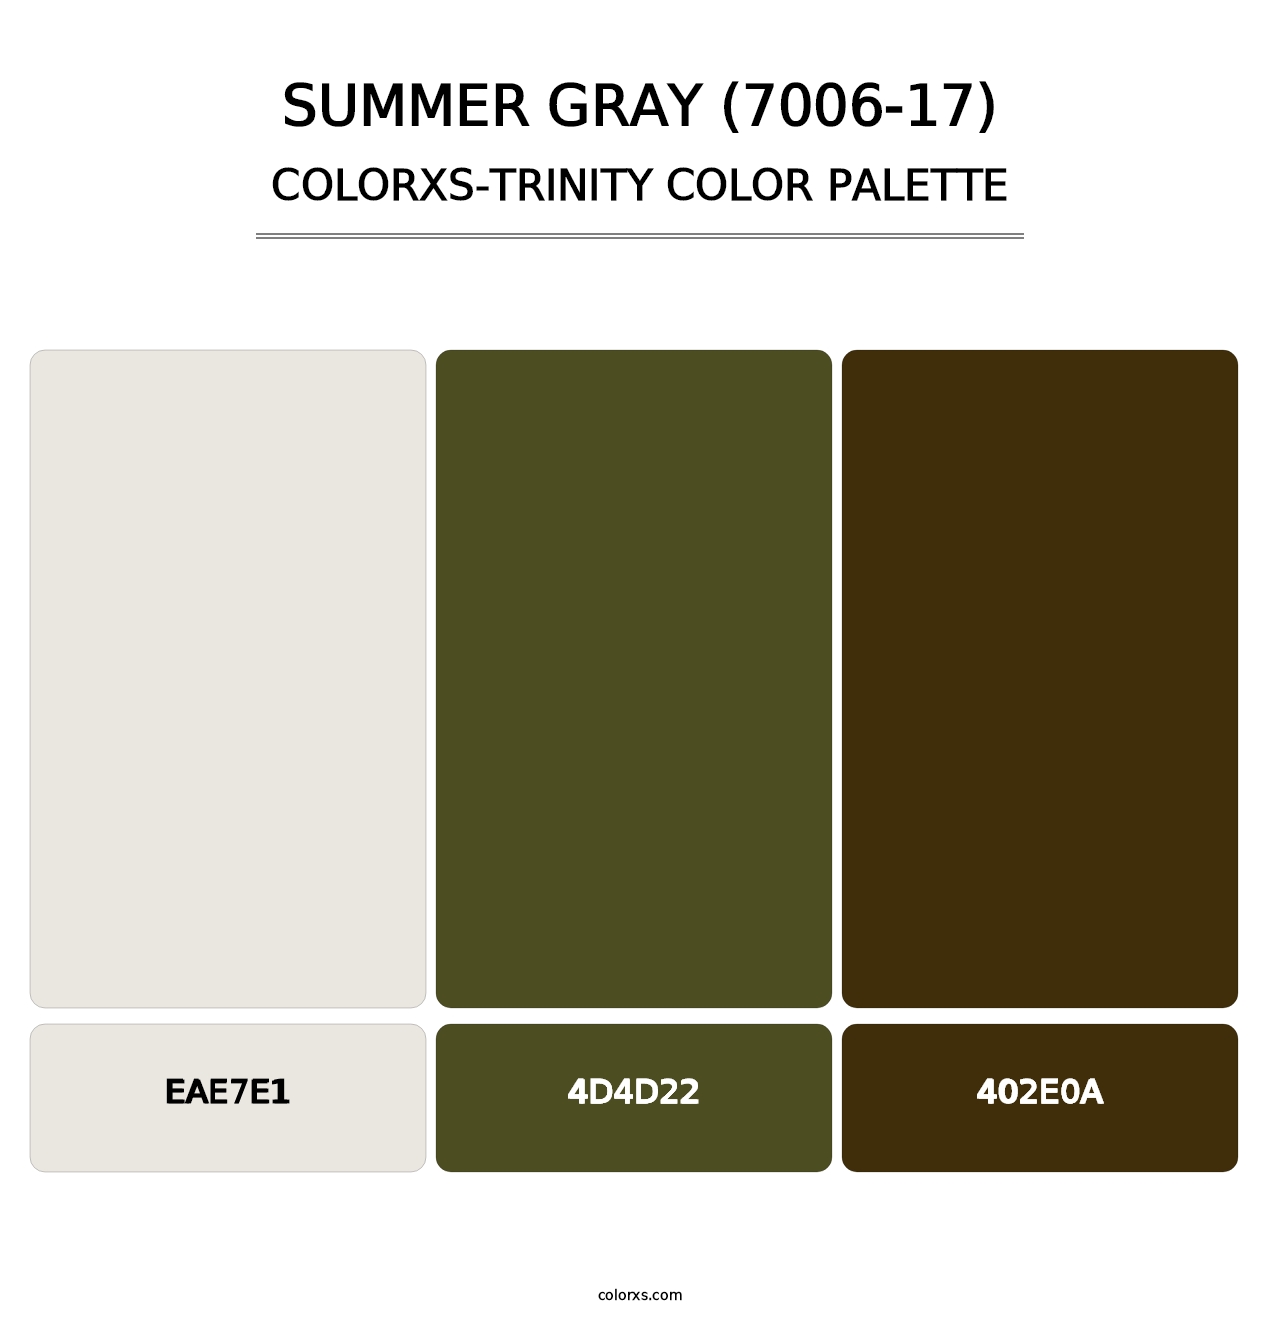 Summer Gray (7006-17) - Colorxs Trinity Palette